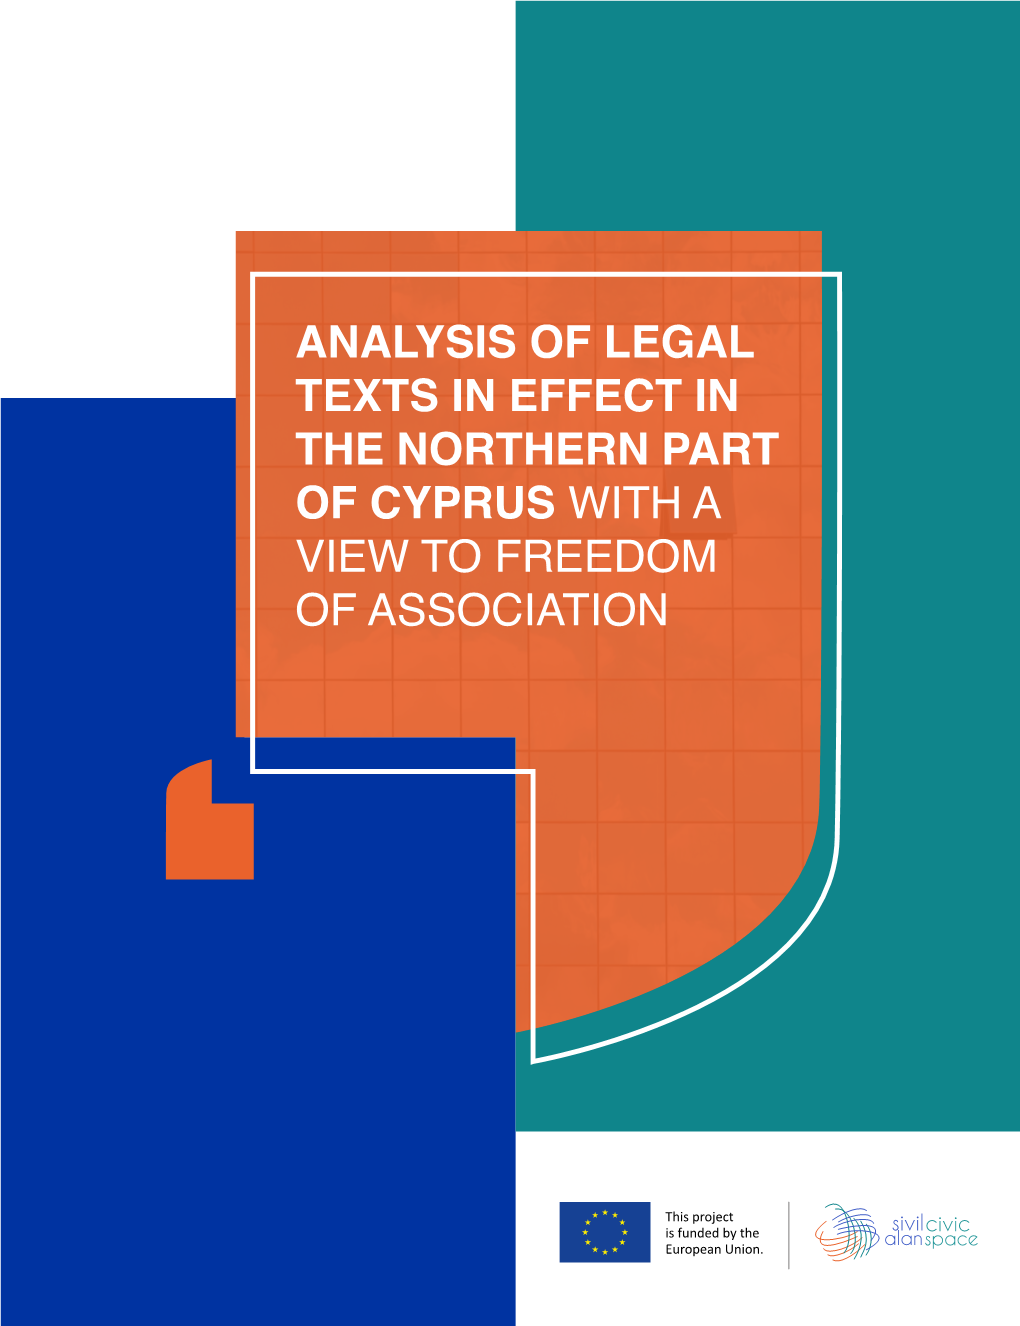 Analysis of Legal Texts in Effect in the Northern Part of Cyprus with a View to Freedom of Association